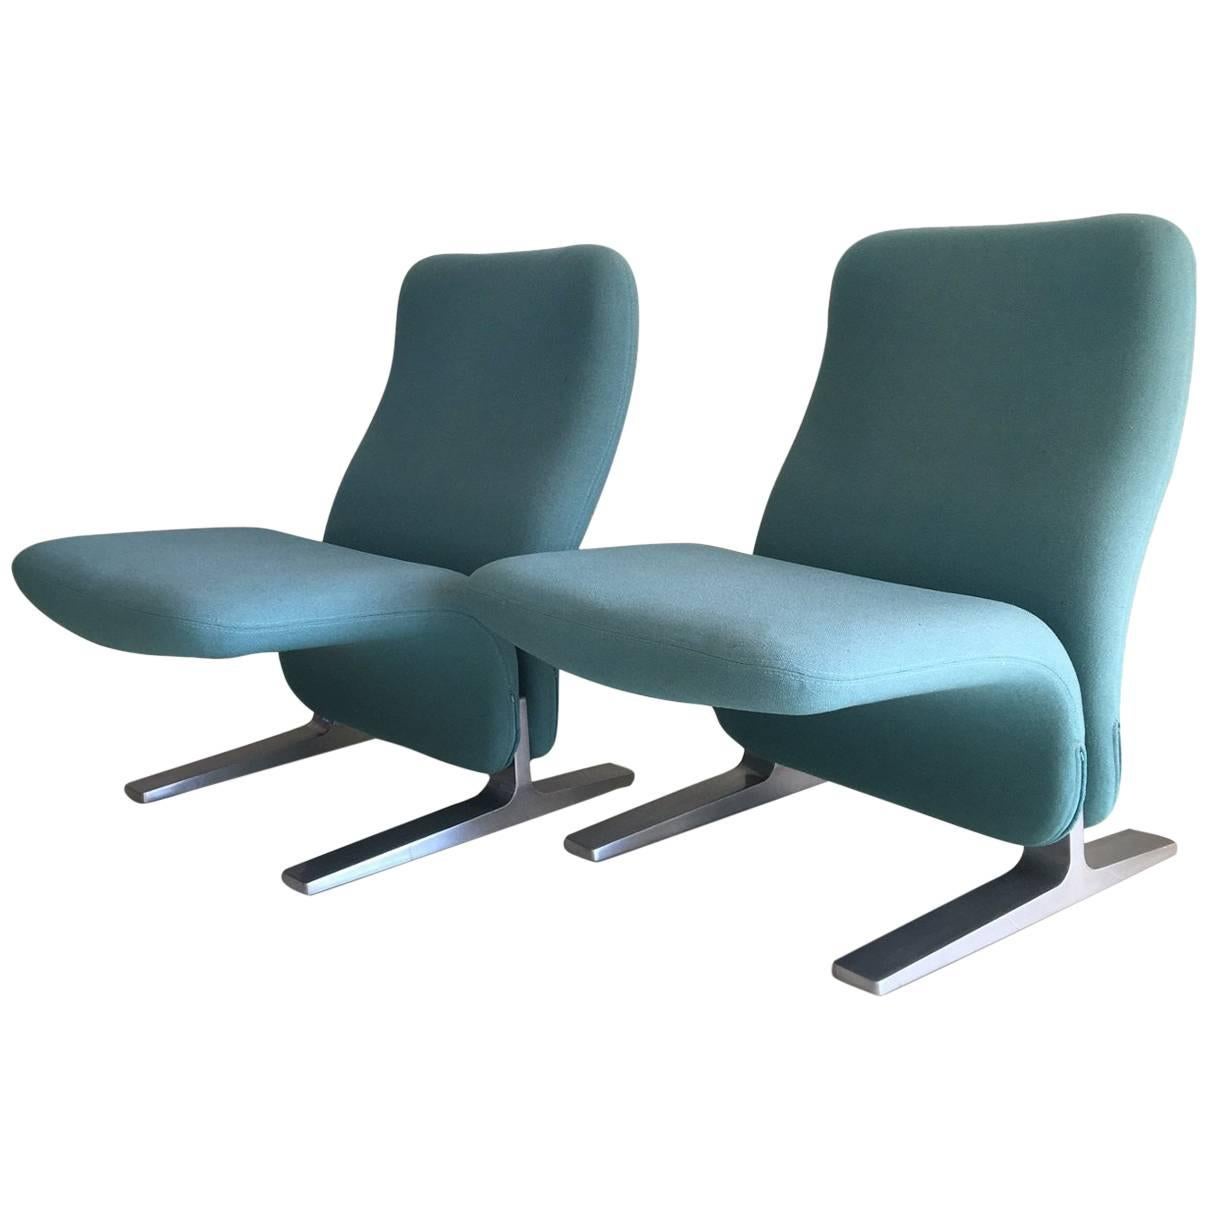 Pierre Paulin Lounge Chairs Model Concorde, for Artifort, 1960s